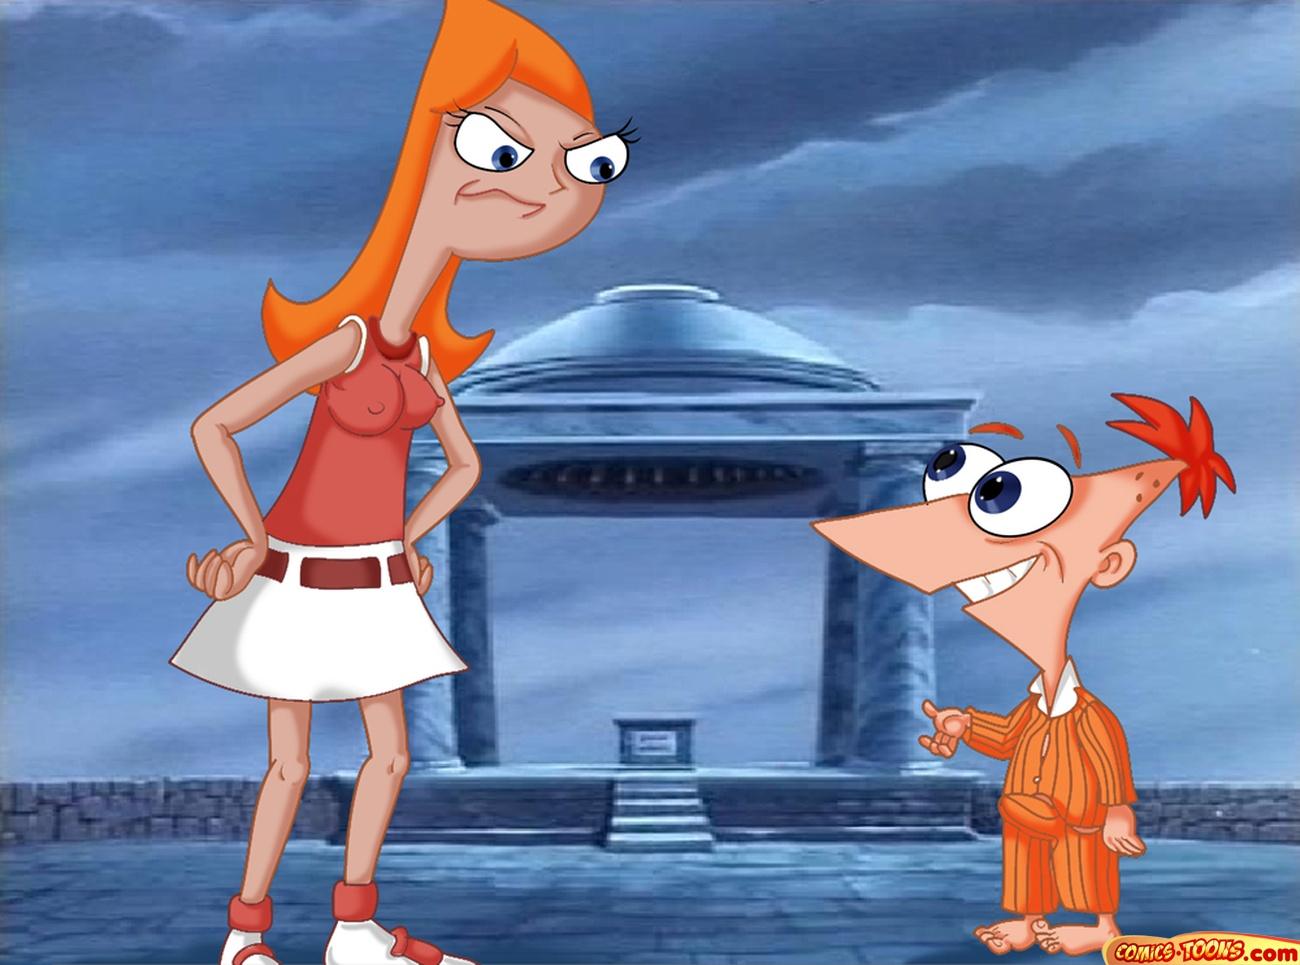 ferb naked phineas and candace from Amazing world of gumball miss simian